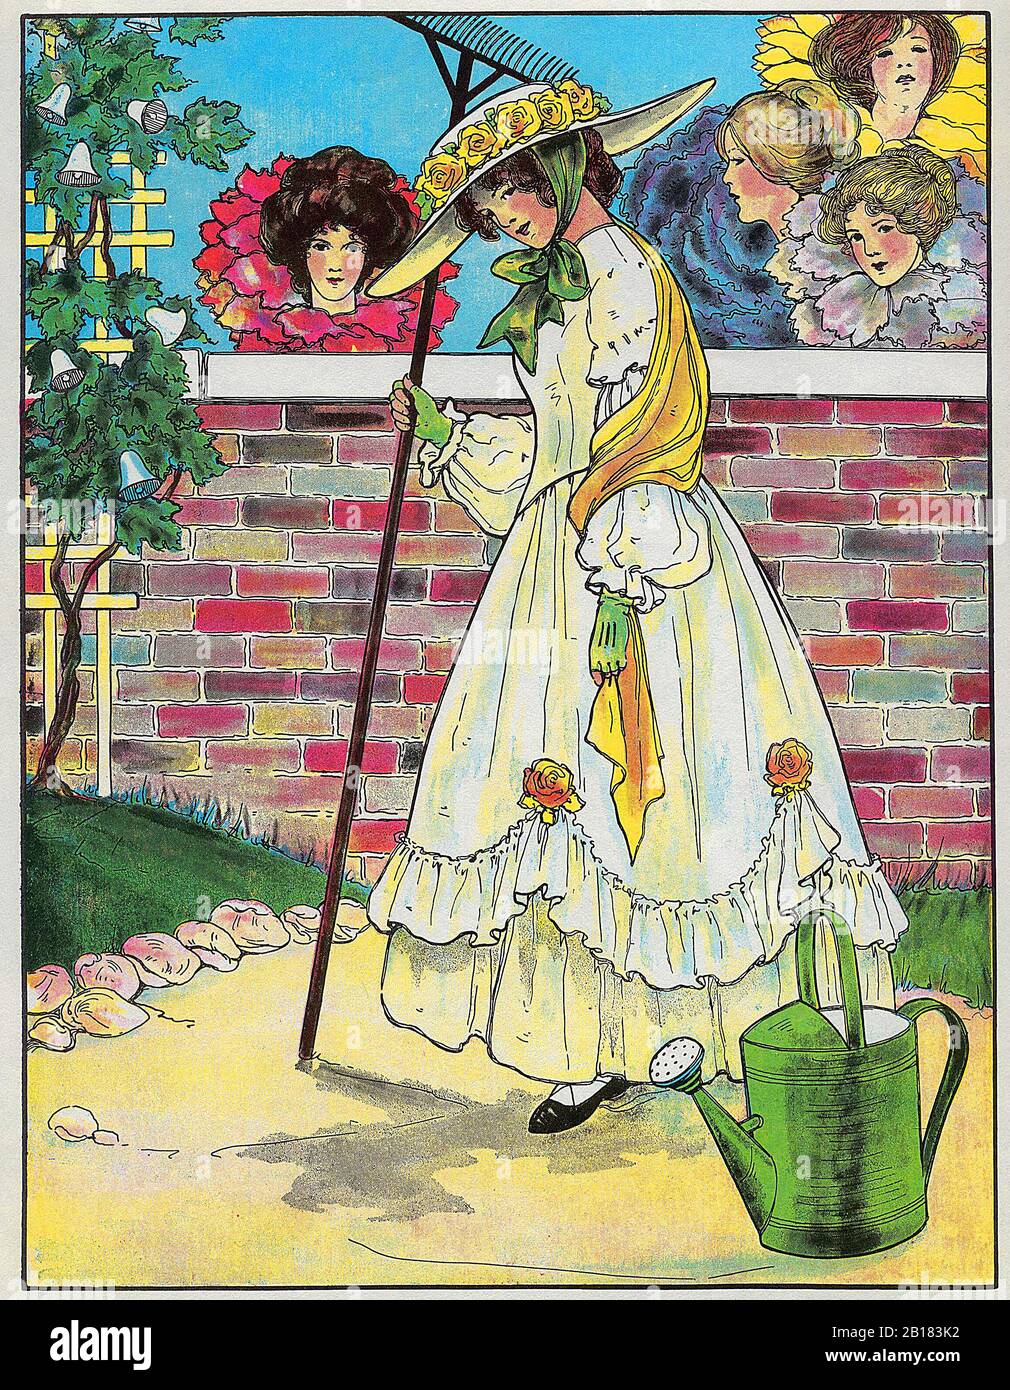 Mary, Mary, quite contrary, How does your garden grow? - The Real Mother Goose Nursery Rhyme Illustration by Blanche Fisher Wright circa 1915 Stock Photo